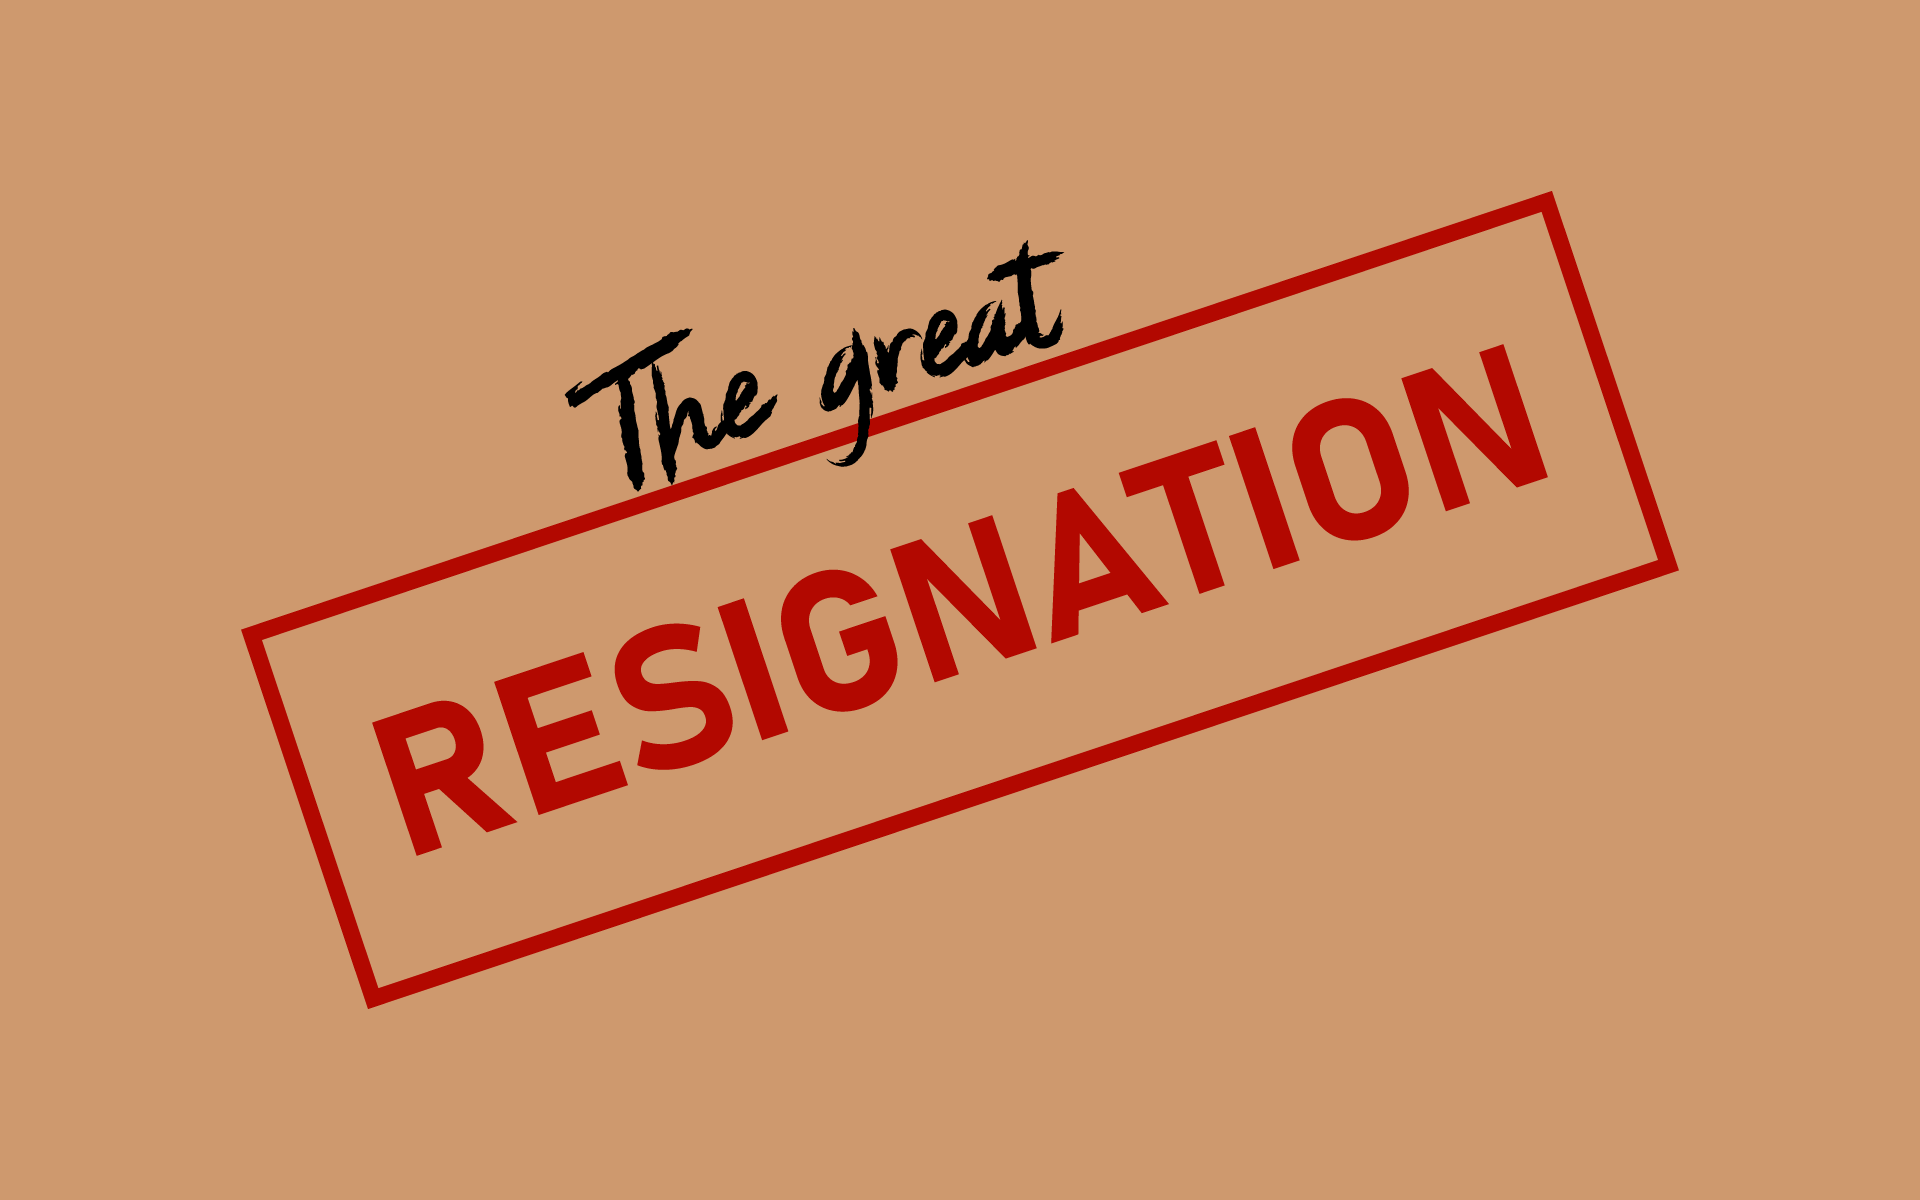 How my life changed for the better when I joined the Great Resignation